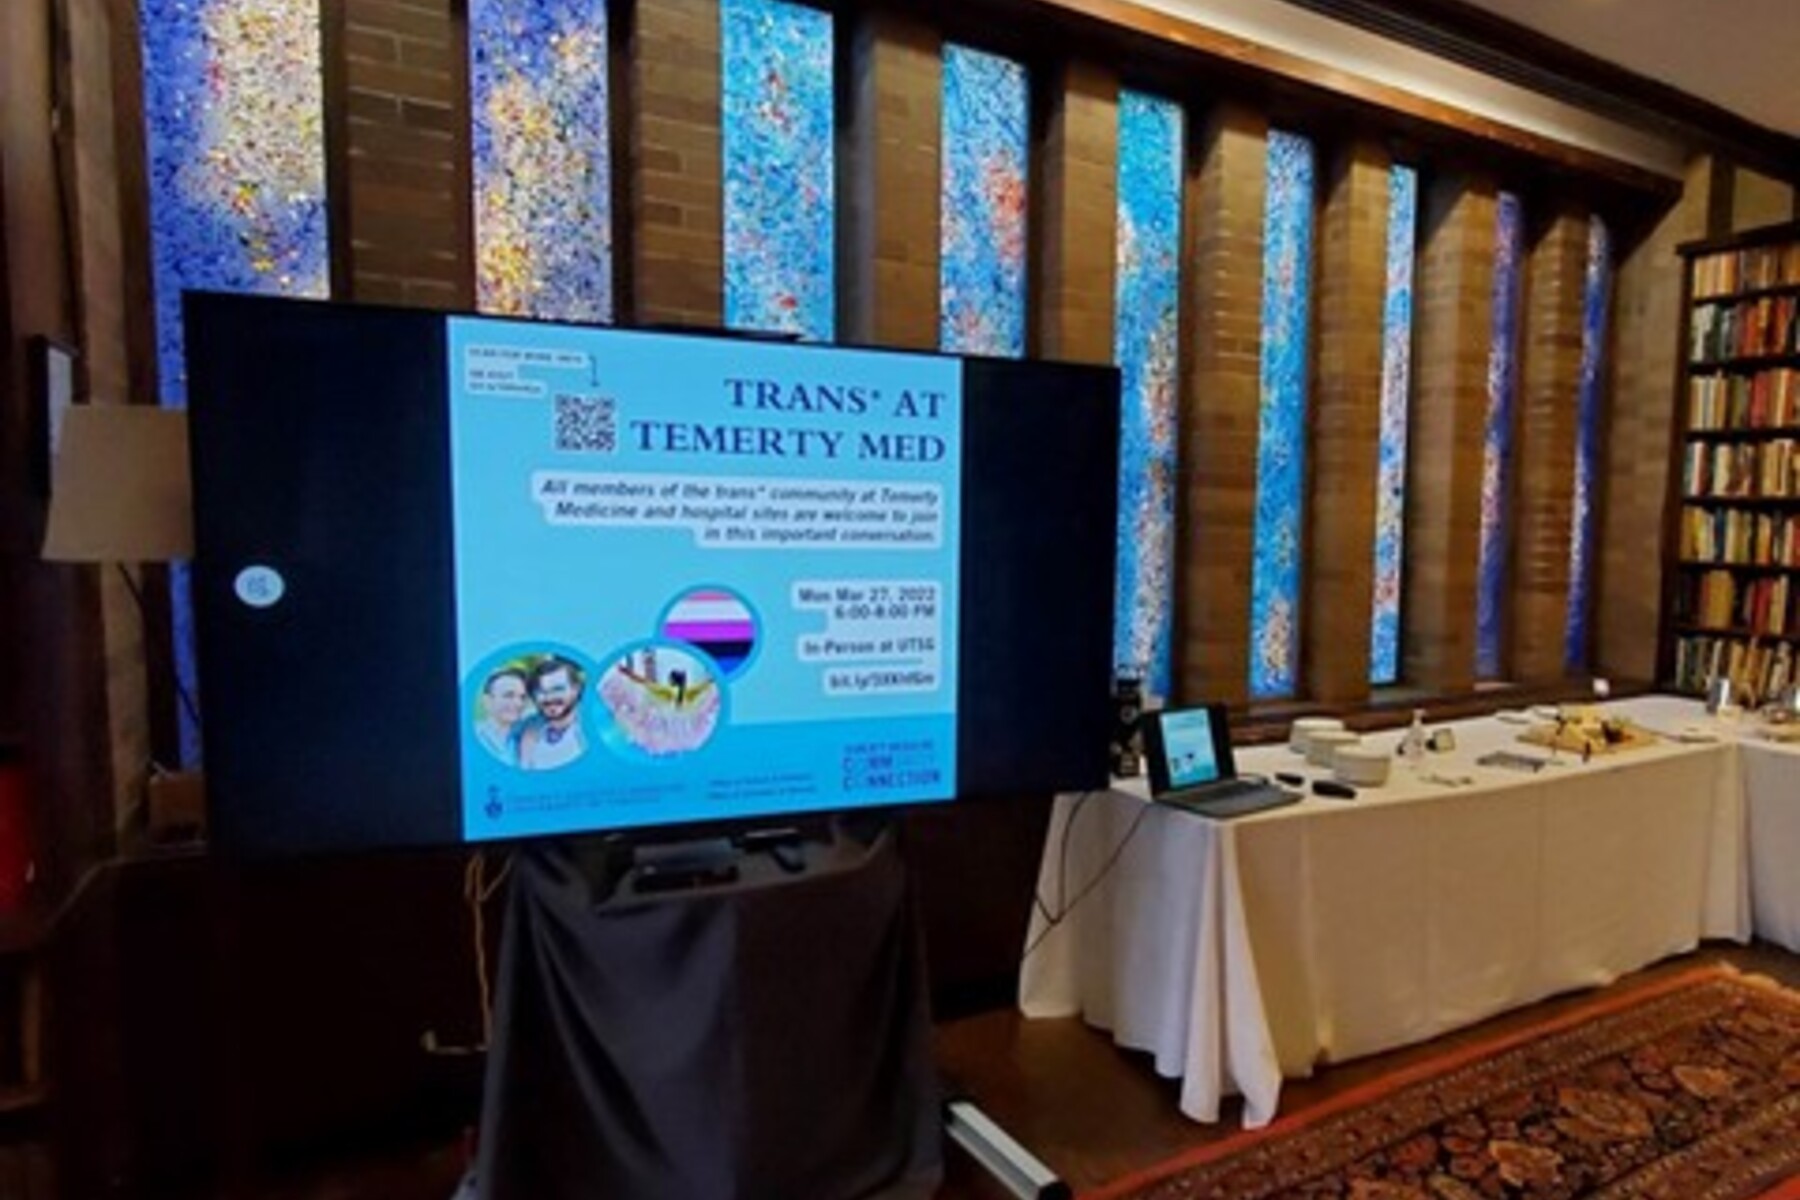 Photograph of a screen in a library showing a slide that reads: "Trans* at Temerty Med. All members of the trans* community of Temerty Medicine and hospital sites are welcome to join in this important conversation. Mon Mar 27, 2022 6:00 - 8:00PM In-person at UTSG" with a link to the event. 